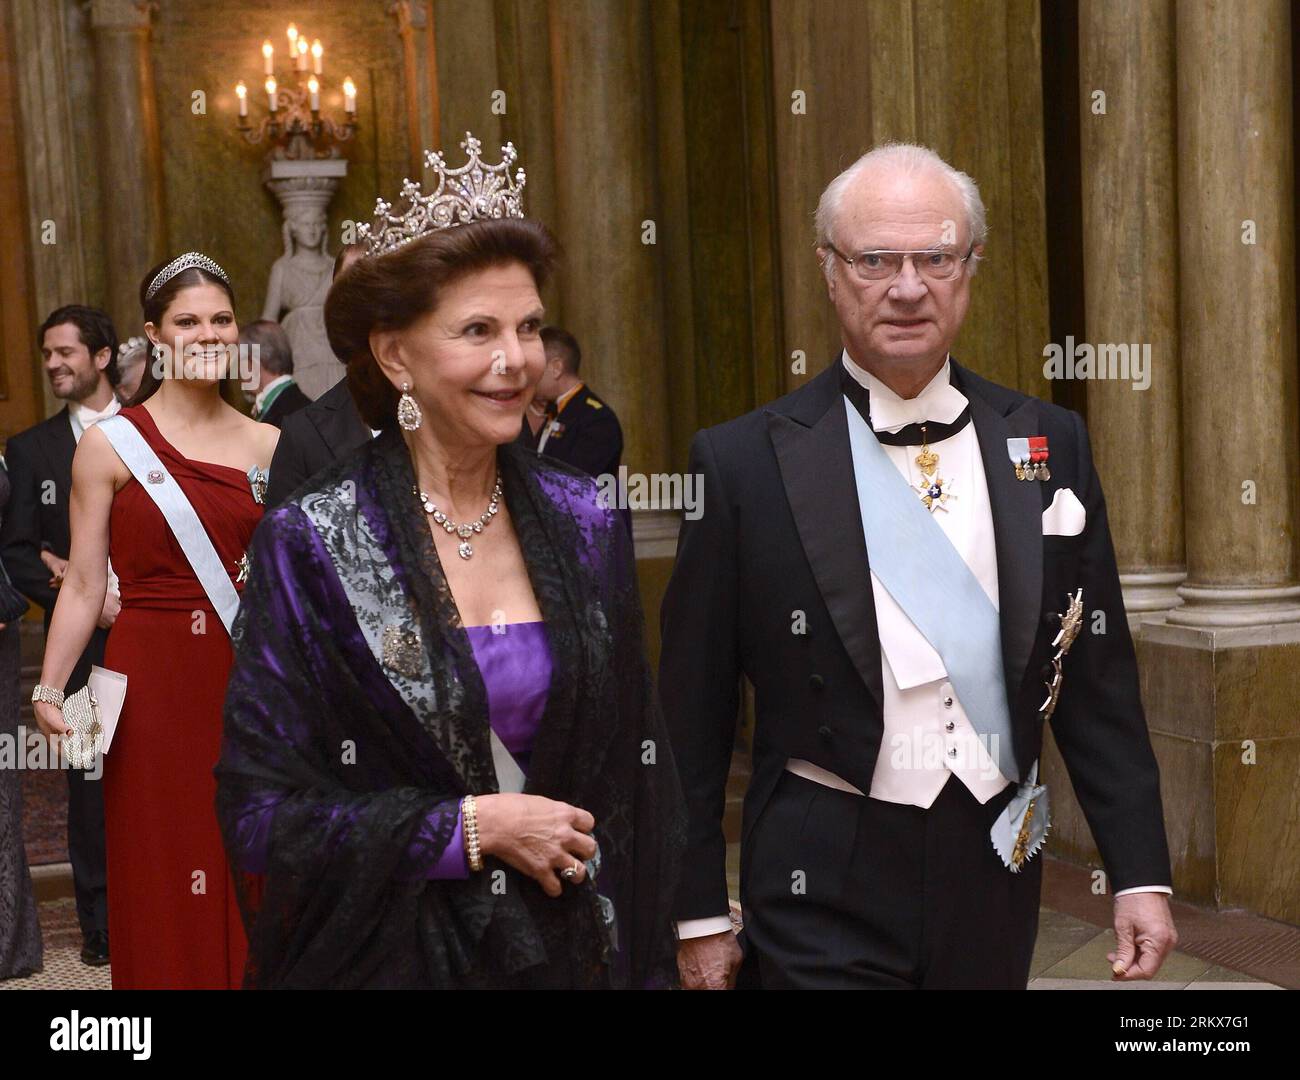 Swedish King Carl XVI Gustaf R and Queen Silvia arrive for the royal banquet held for Nobel laureates at royal palace in Stockholm, capital of Sweden, on Dec. 11, 2012. Xinhua/Wu Wei SWEDEN-STOCKHOLM-ROYAL BANQUET-NOBEL PUBLICATIONxNOTxINxCHN Stock Photo